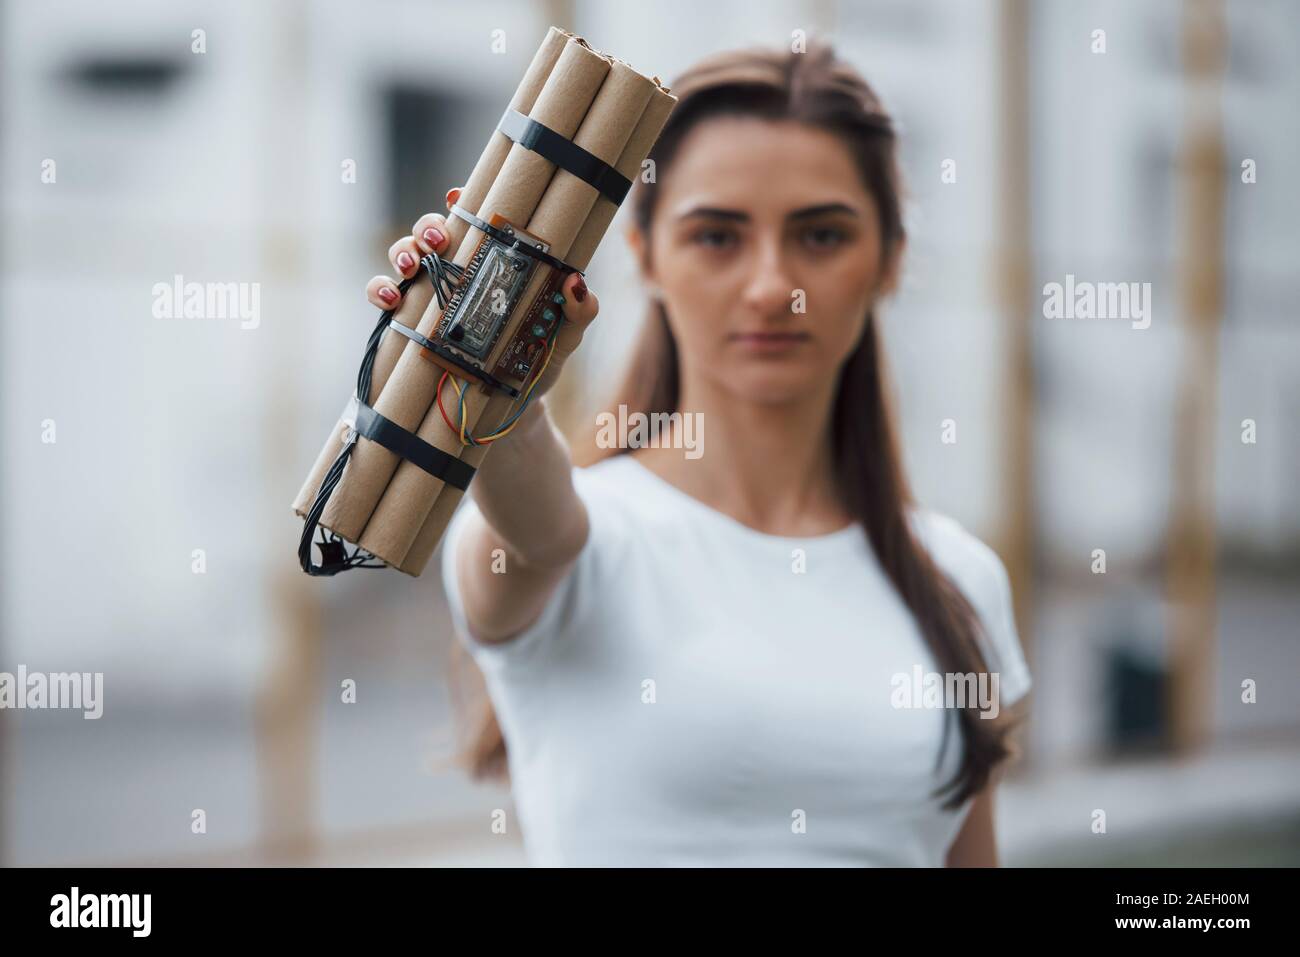 Digital elements. Showing time bomb. Young woman holding dangerous explosive weapon in hand Stock Photo